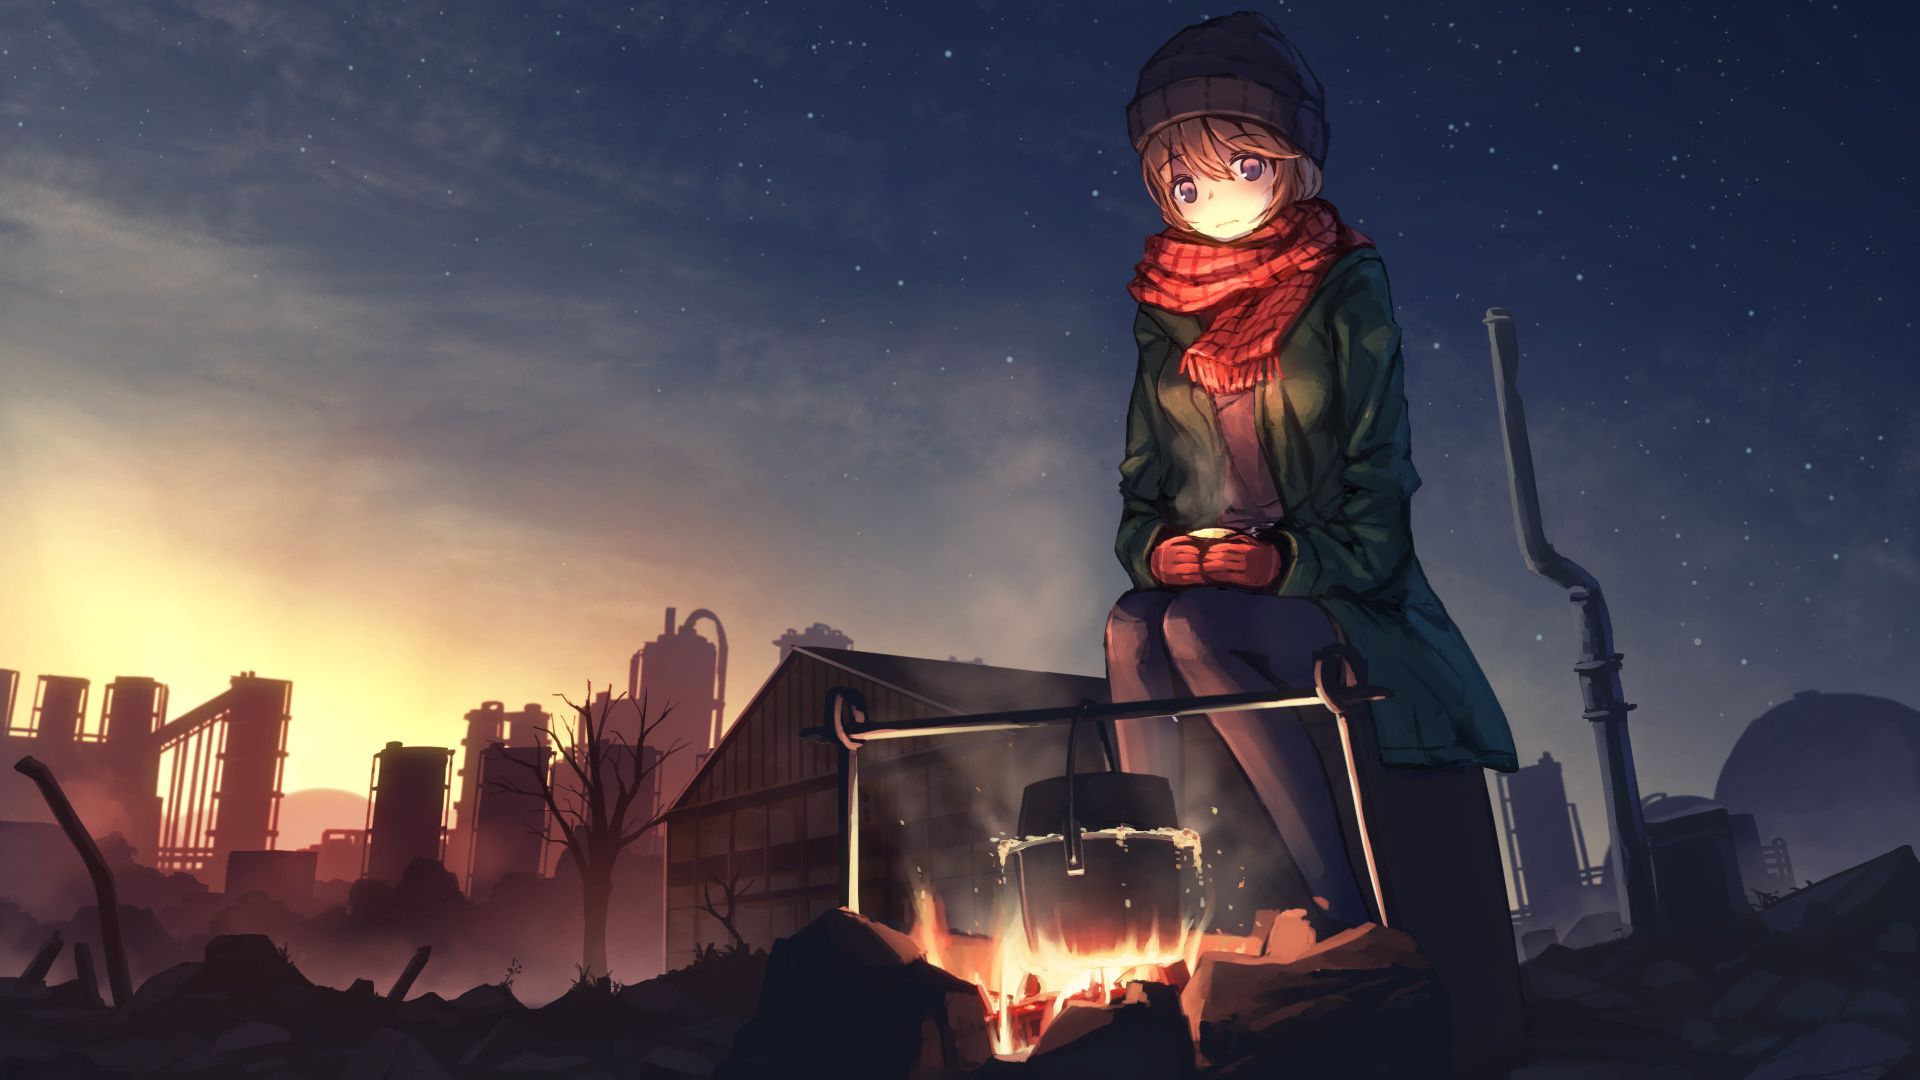 Wallpaper Cute, girl, night out, fire, anime